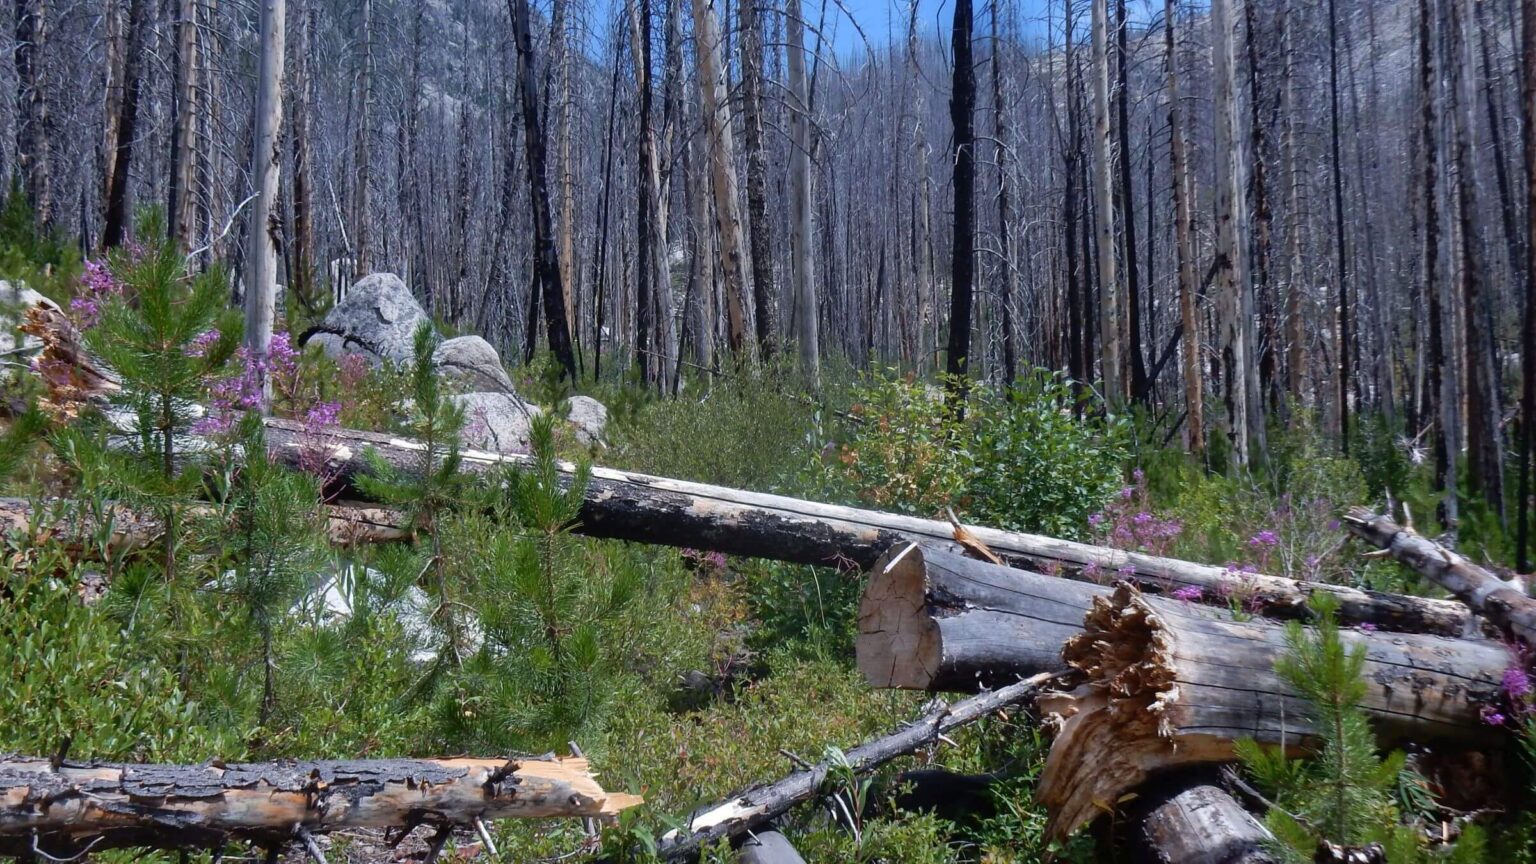 Frank Church-River of No Return Wilderness, 11 years after Nine Shot Fire, August